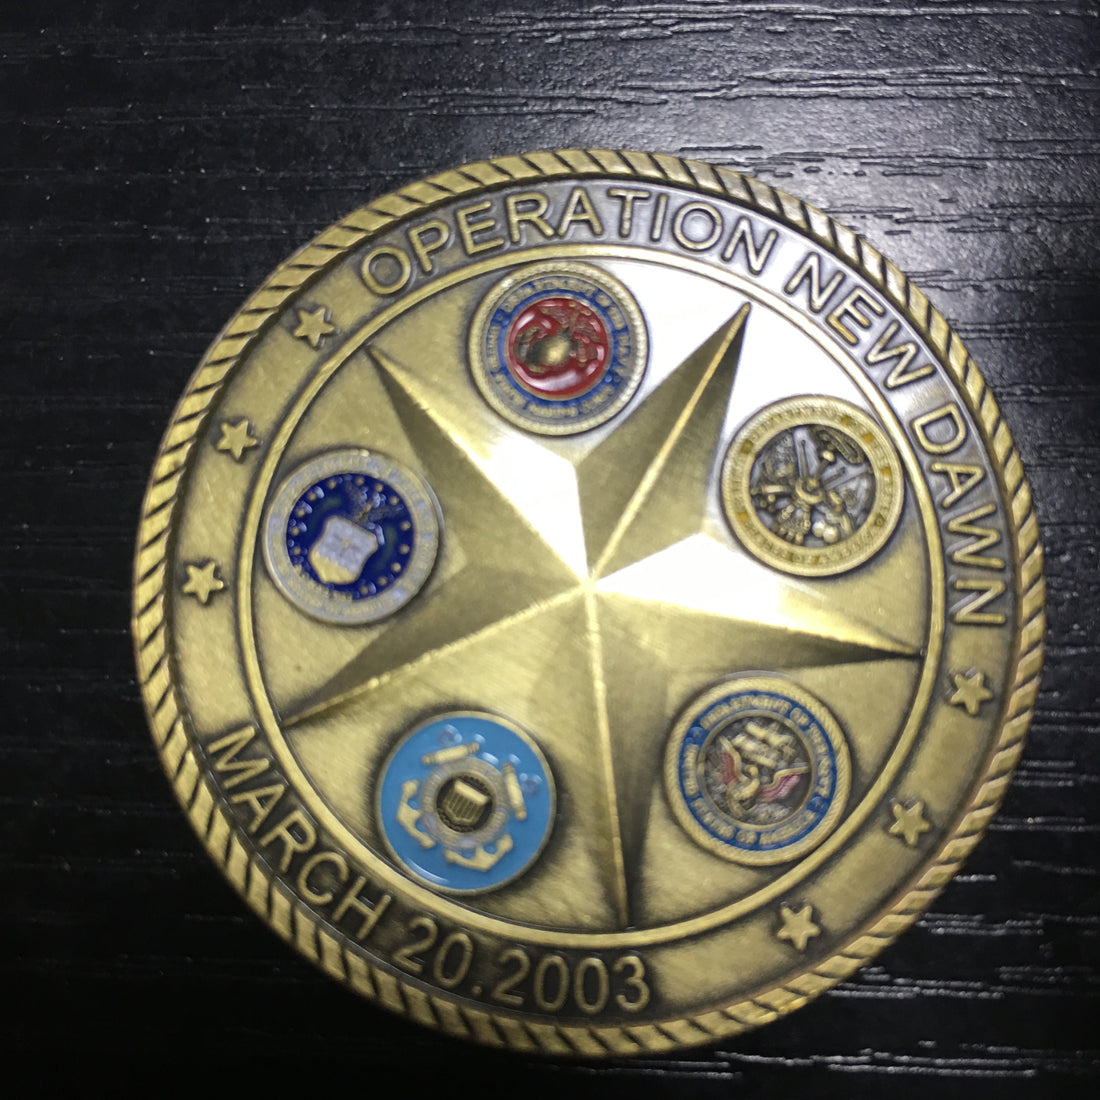 Challenge coin of Saint George pray for us, Operation Iraqi Freedom,